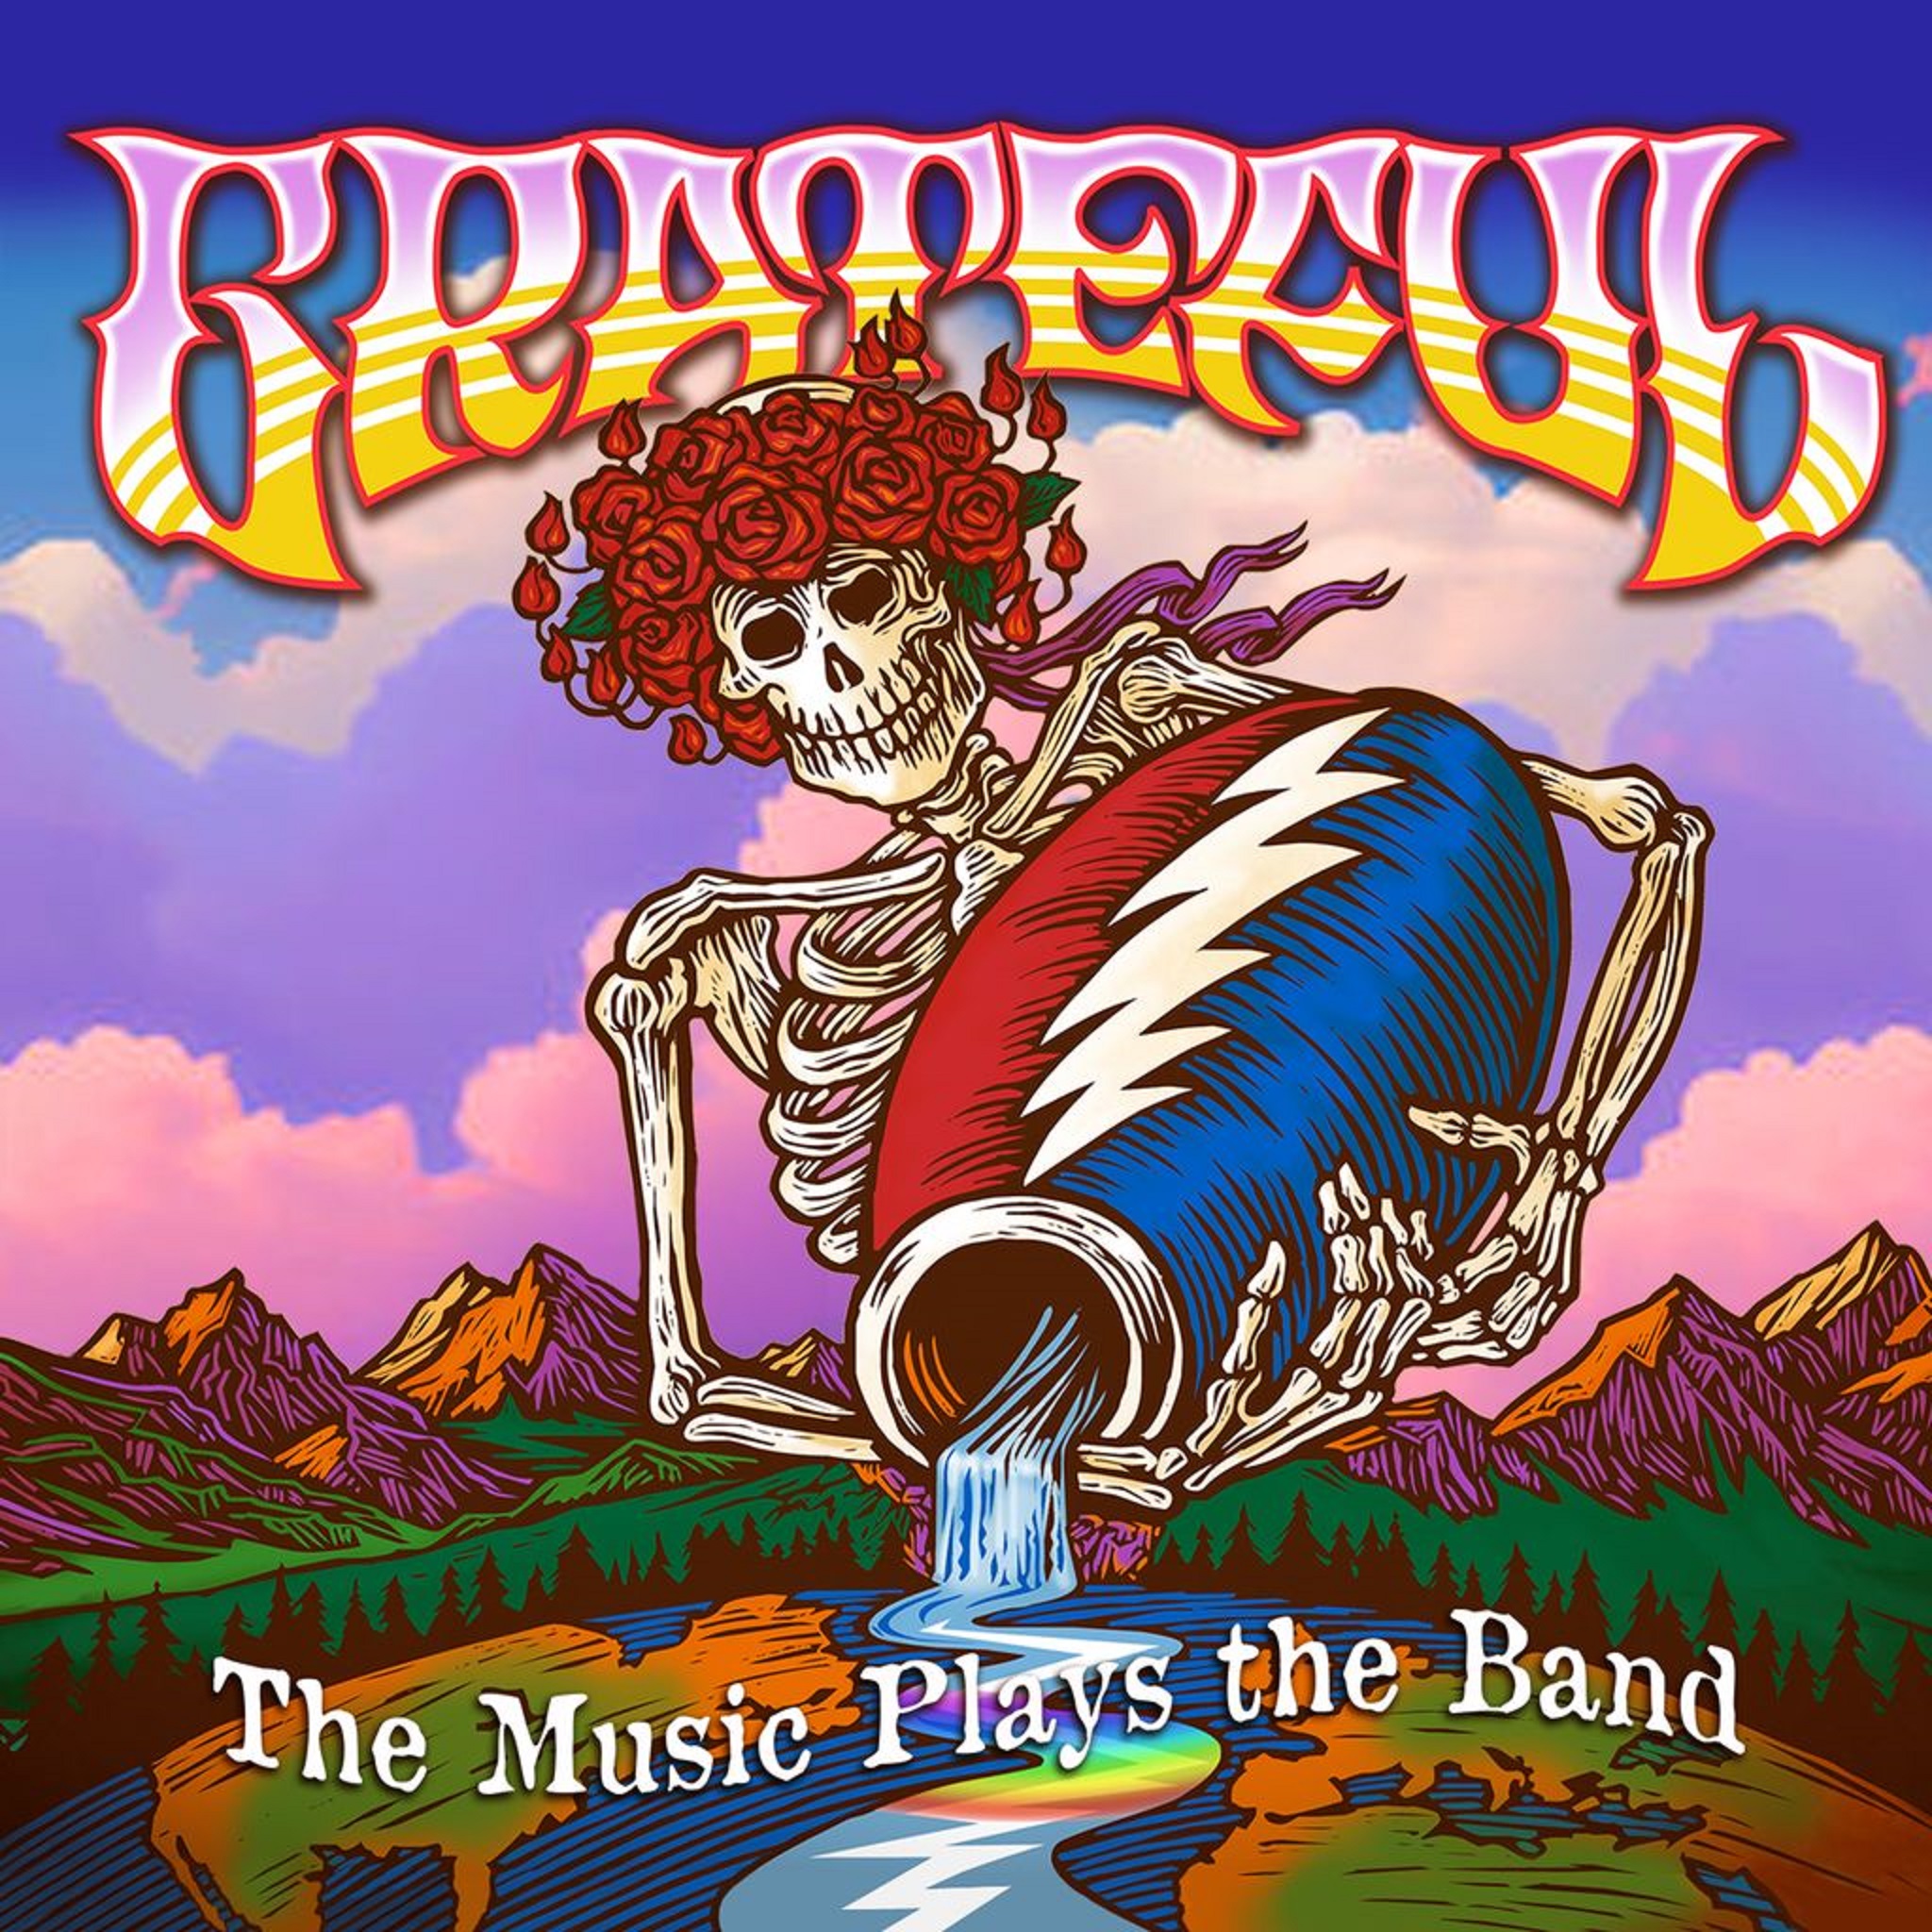 Grateful: The Music Plays the Band New Compilation Album Out Today via ALP  Featuring Oteil Burbridge, Dark Star Orchestra and More